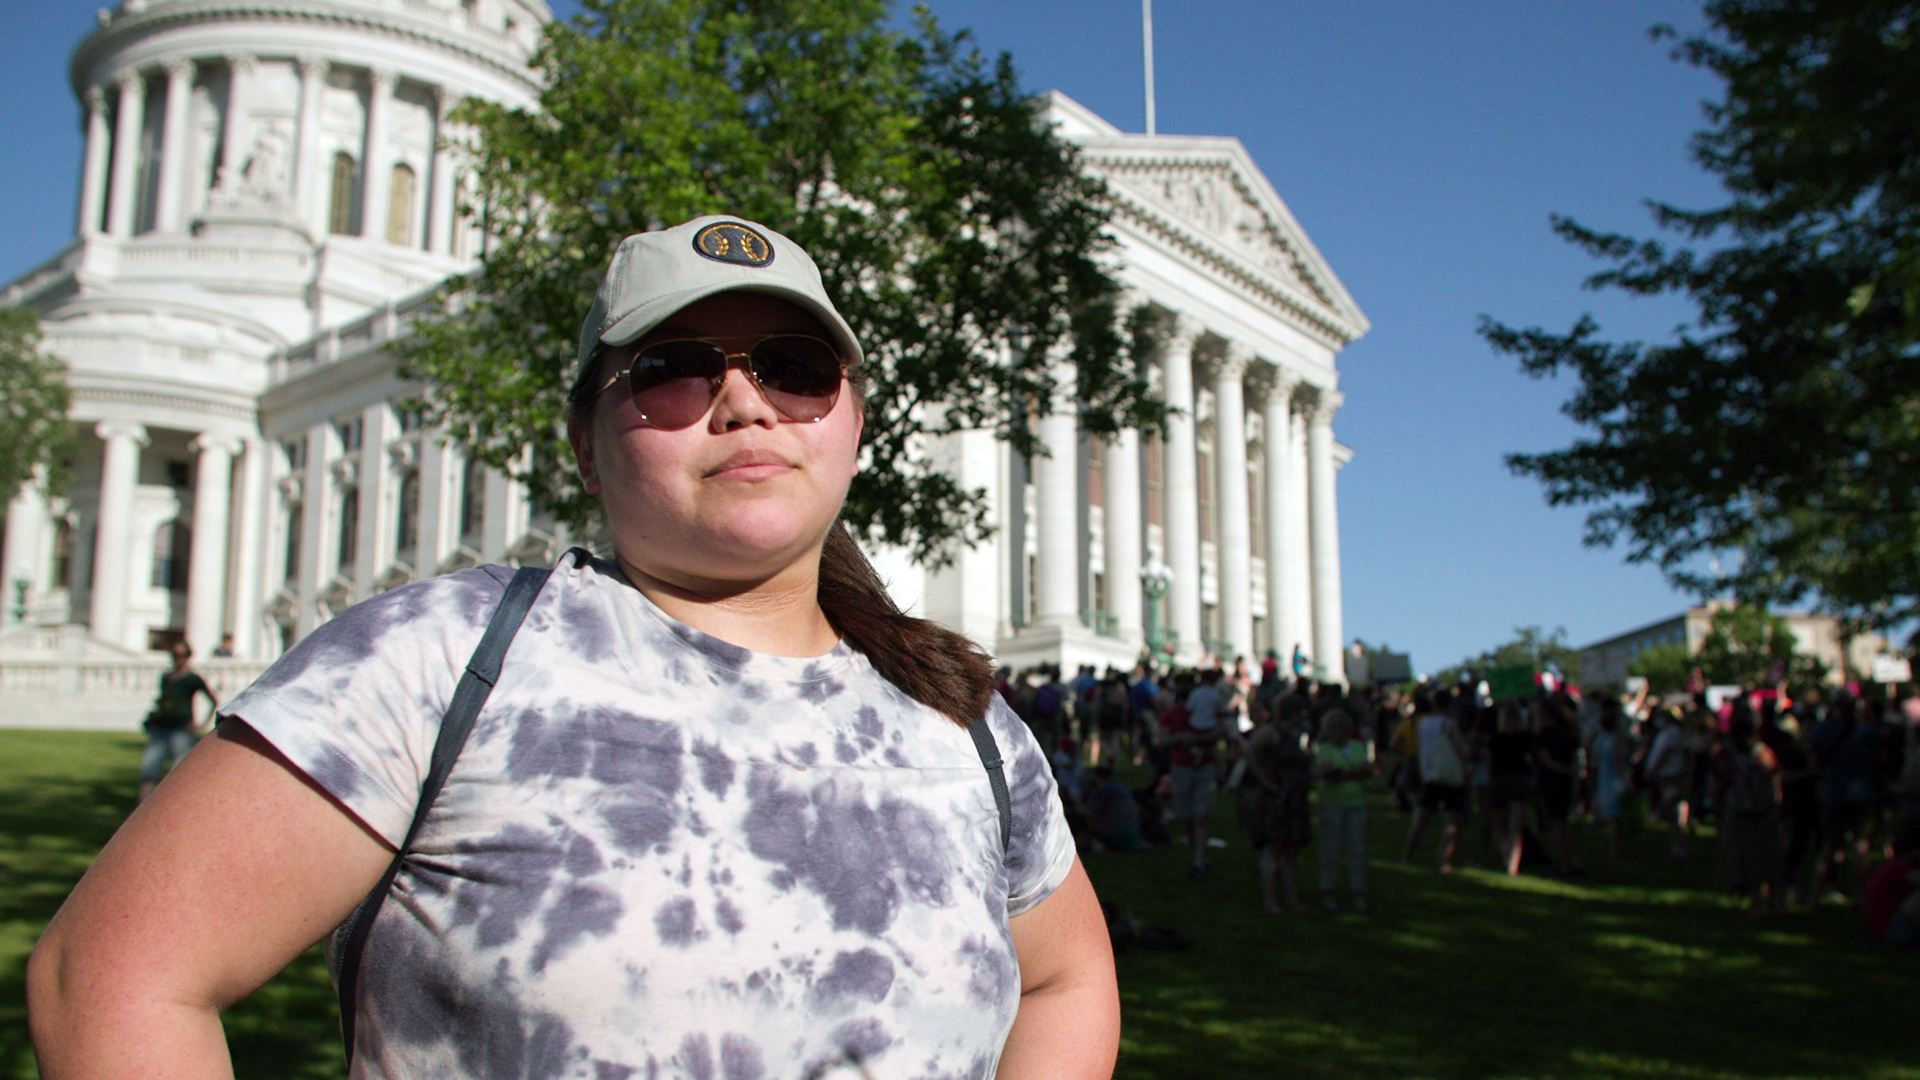 Alyssa Bhoopat stands in front of the Wisconsin State Capitol with protesters in the background.